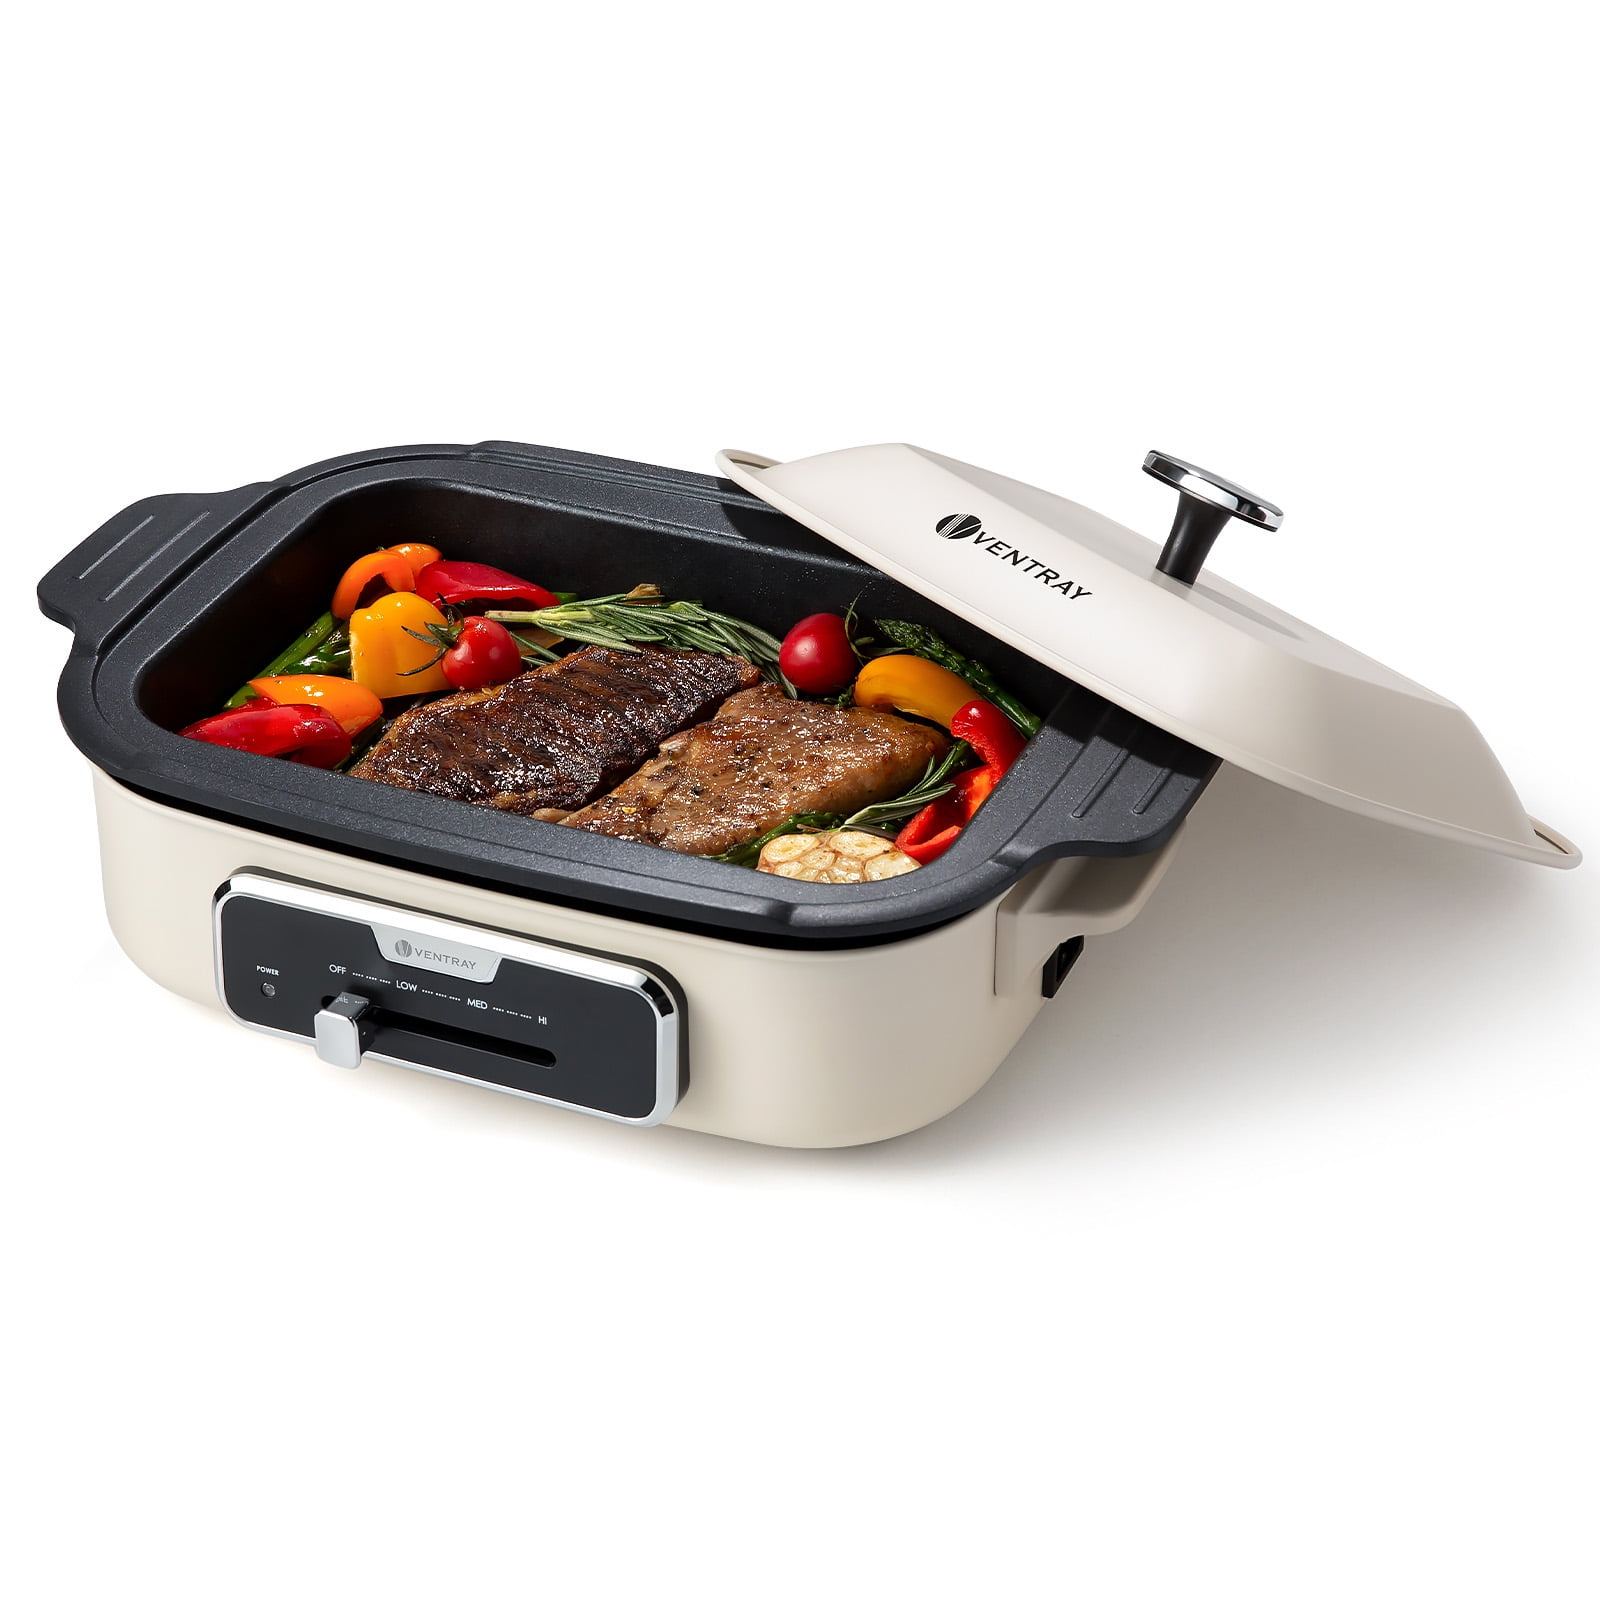 Ventray Electric Smokeless Grill Healthy with Rapid Even Beige - Walmart.com